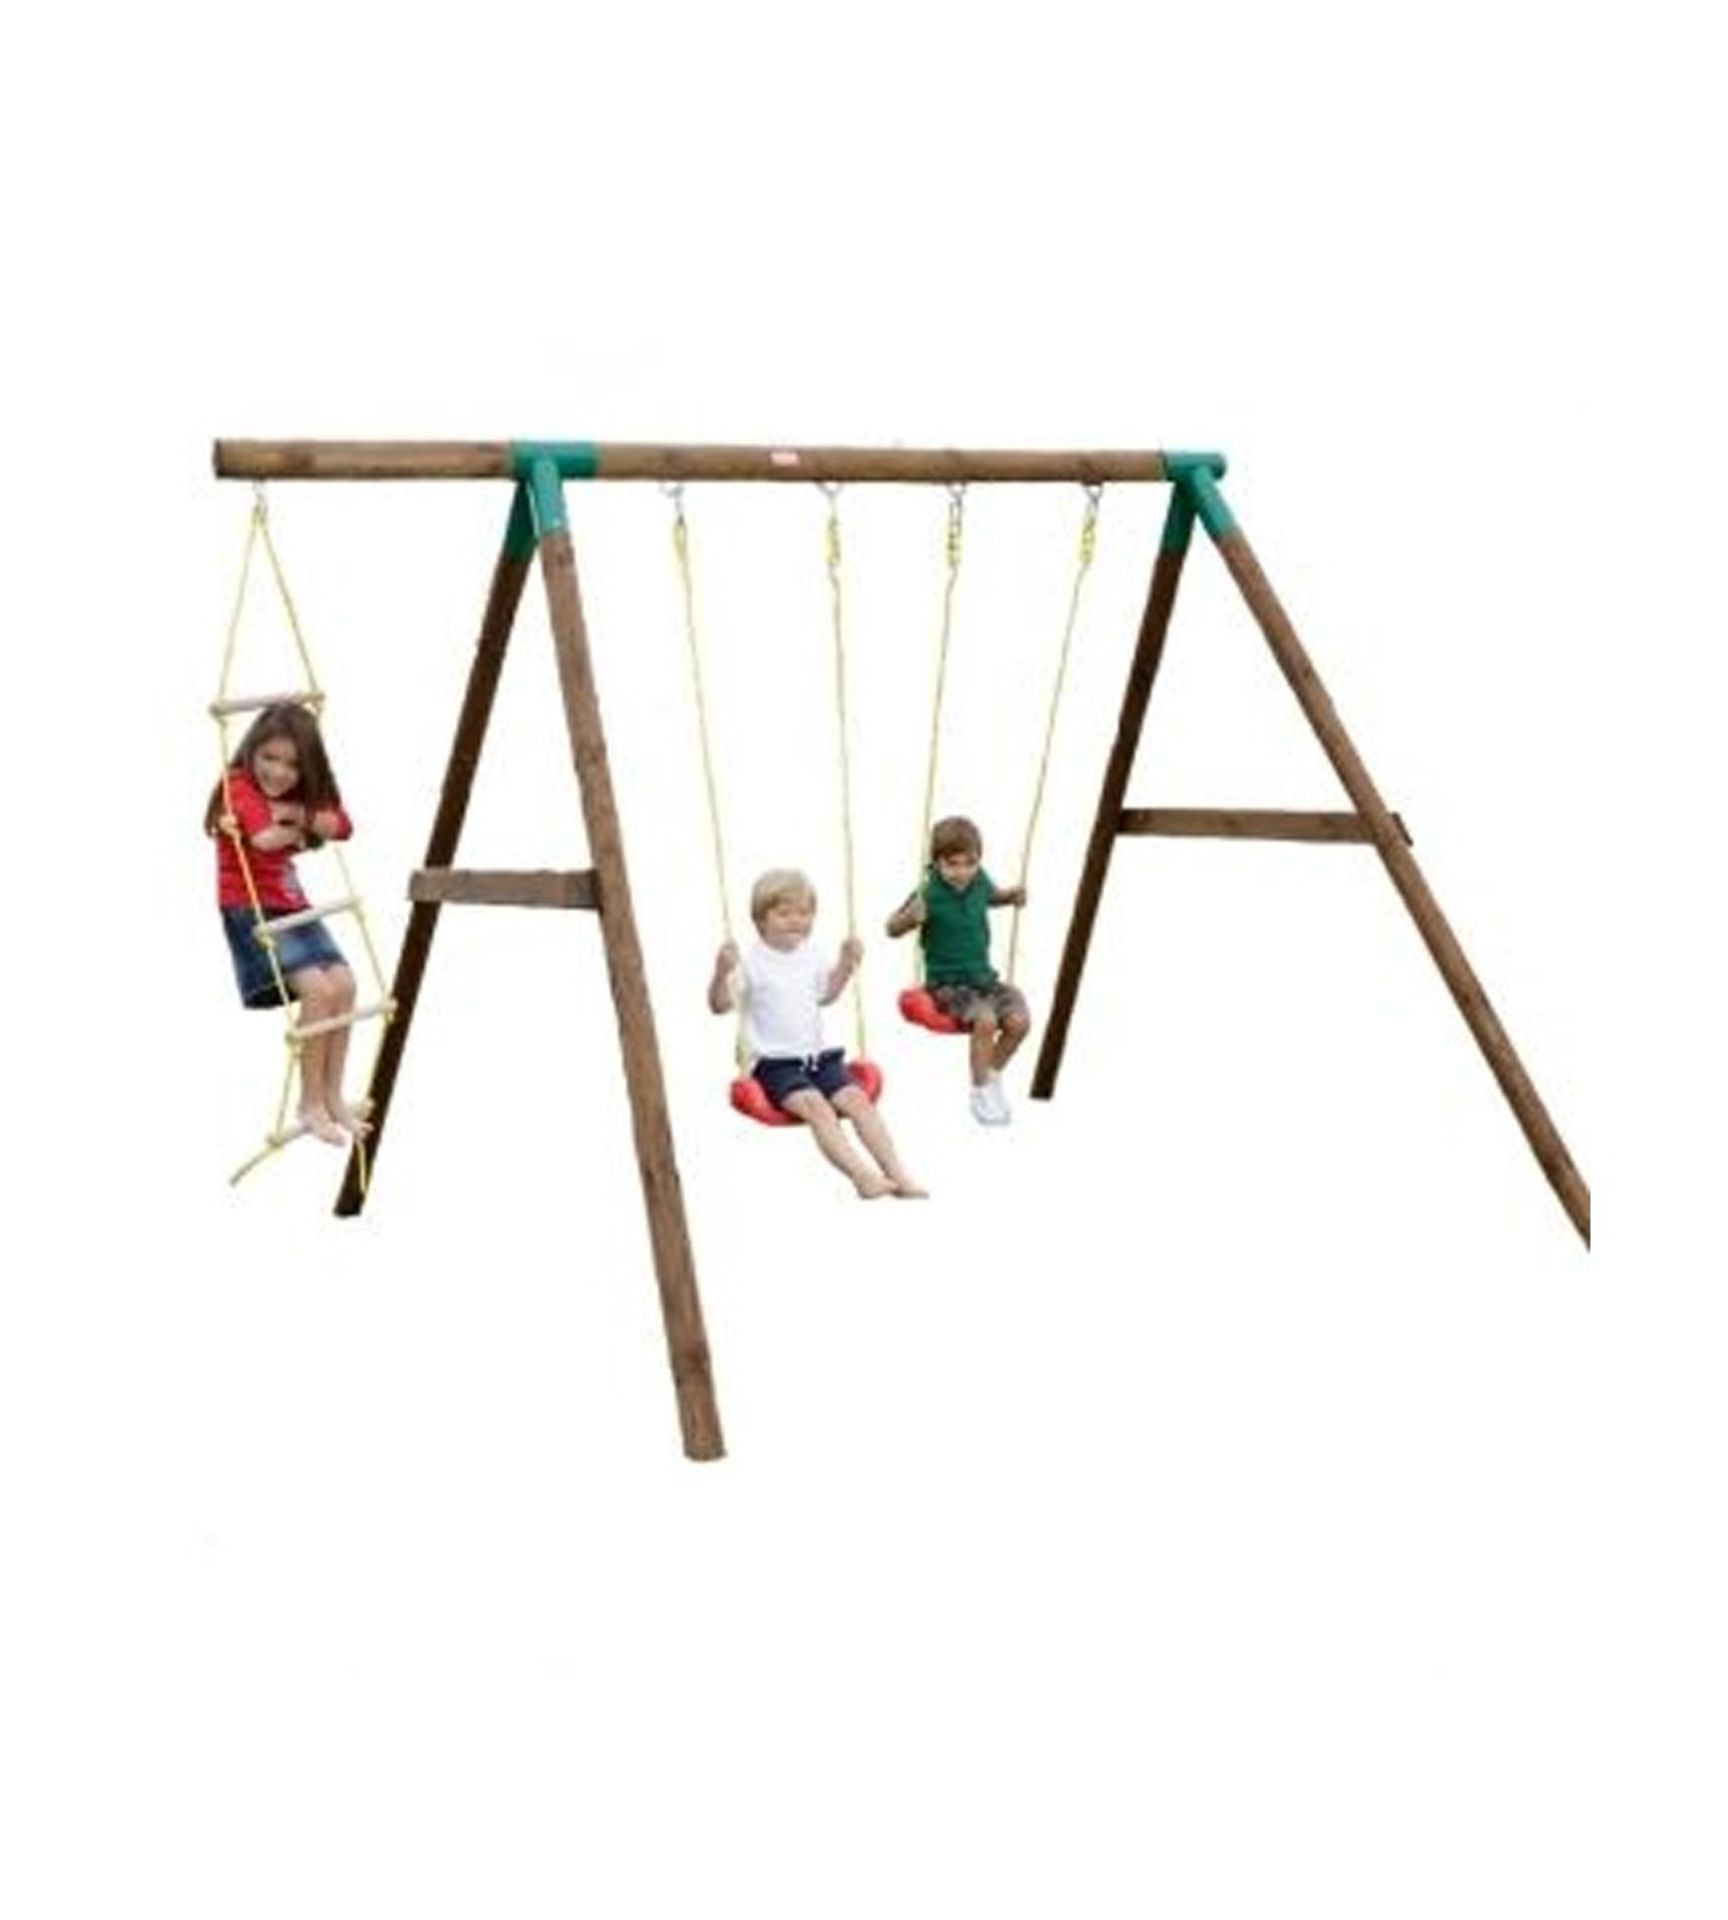 1 x Little Tikes Riga Swing Set with Ladder. RRP £319.99. This wooden play system will provide hours - Image 2 of 2